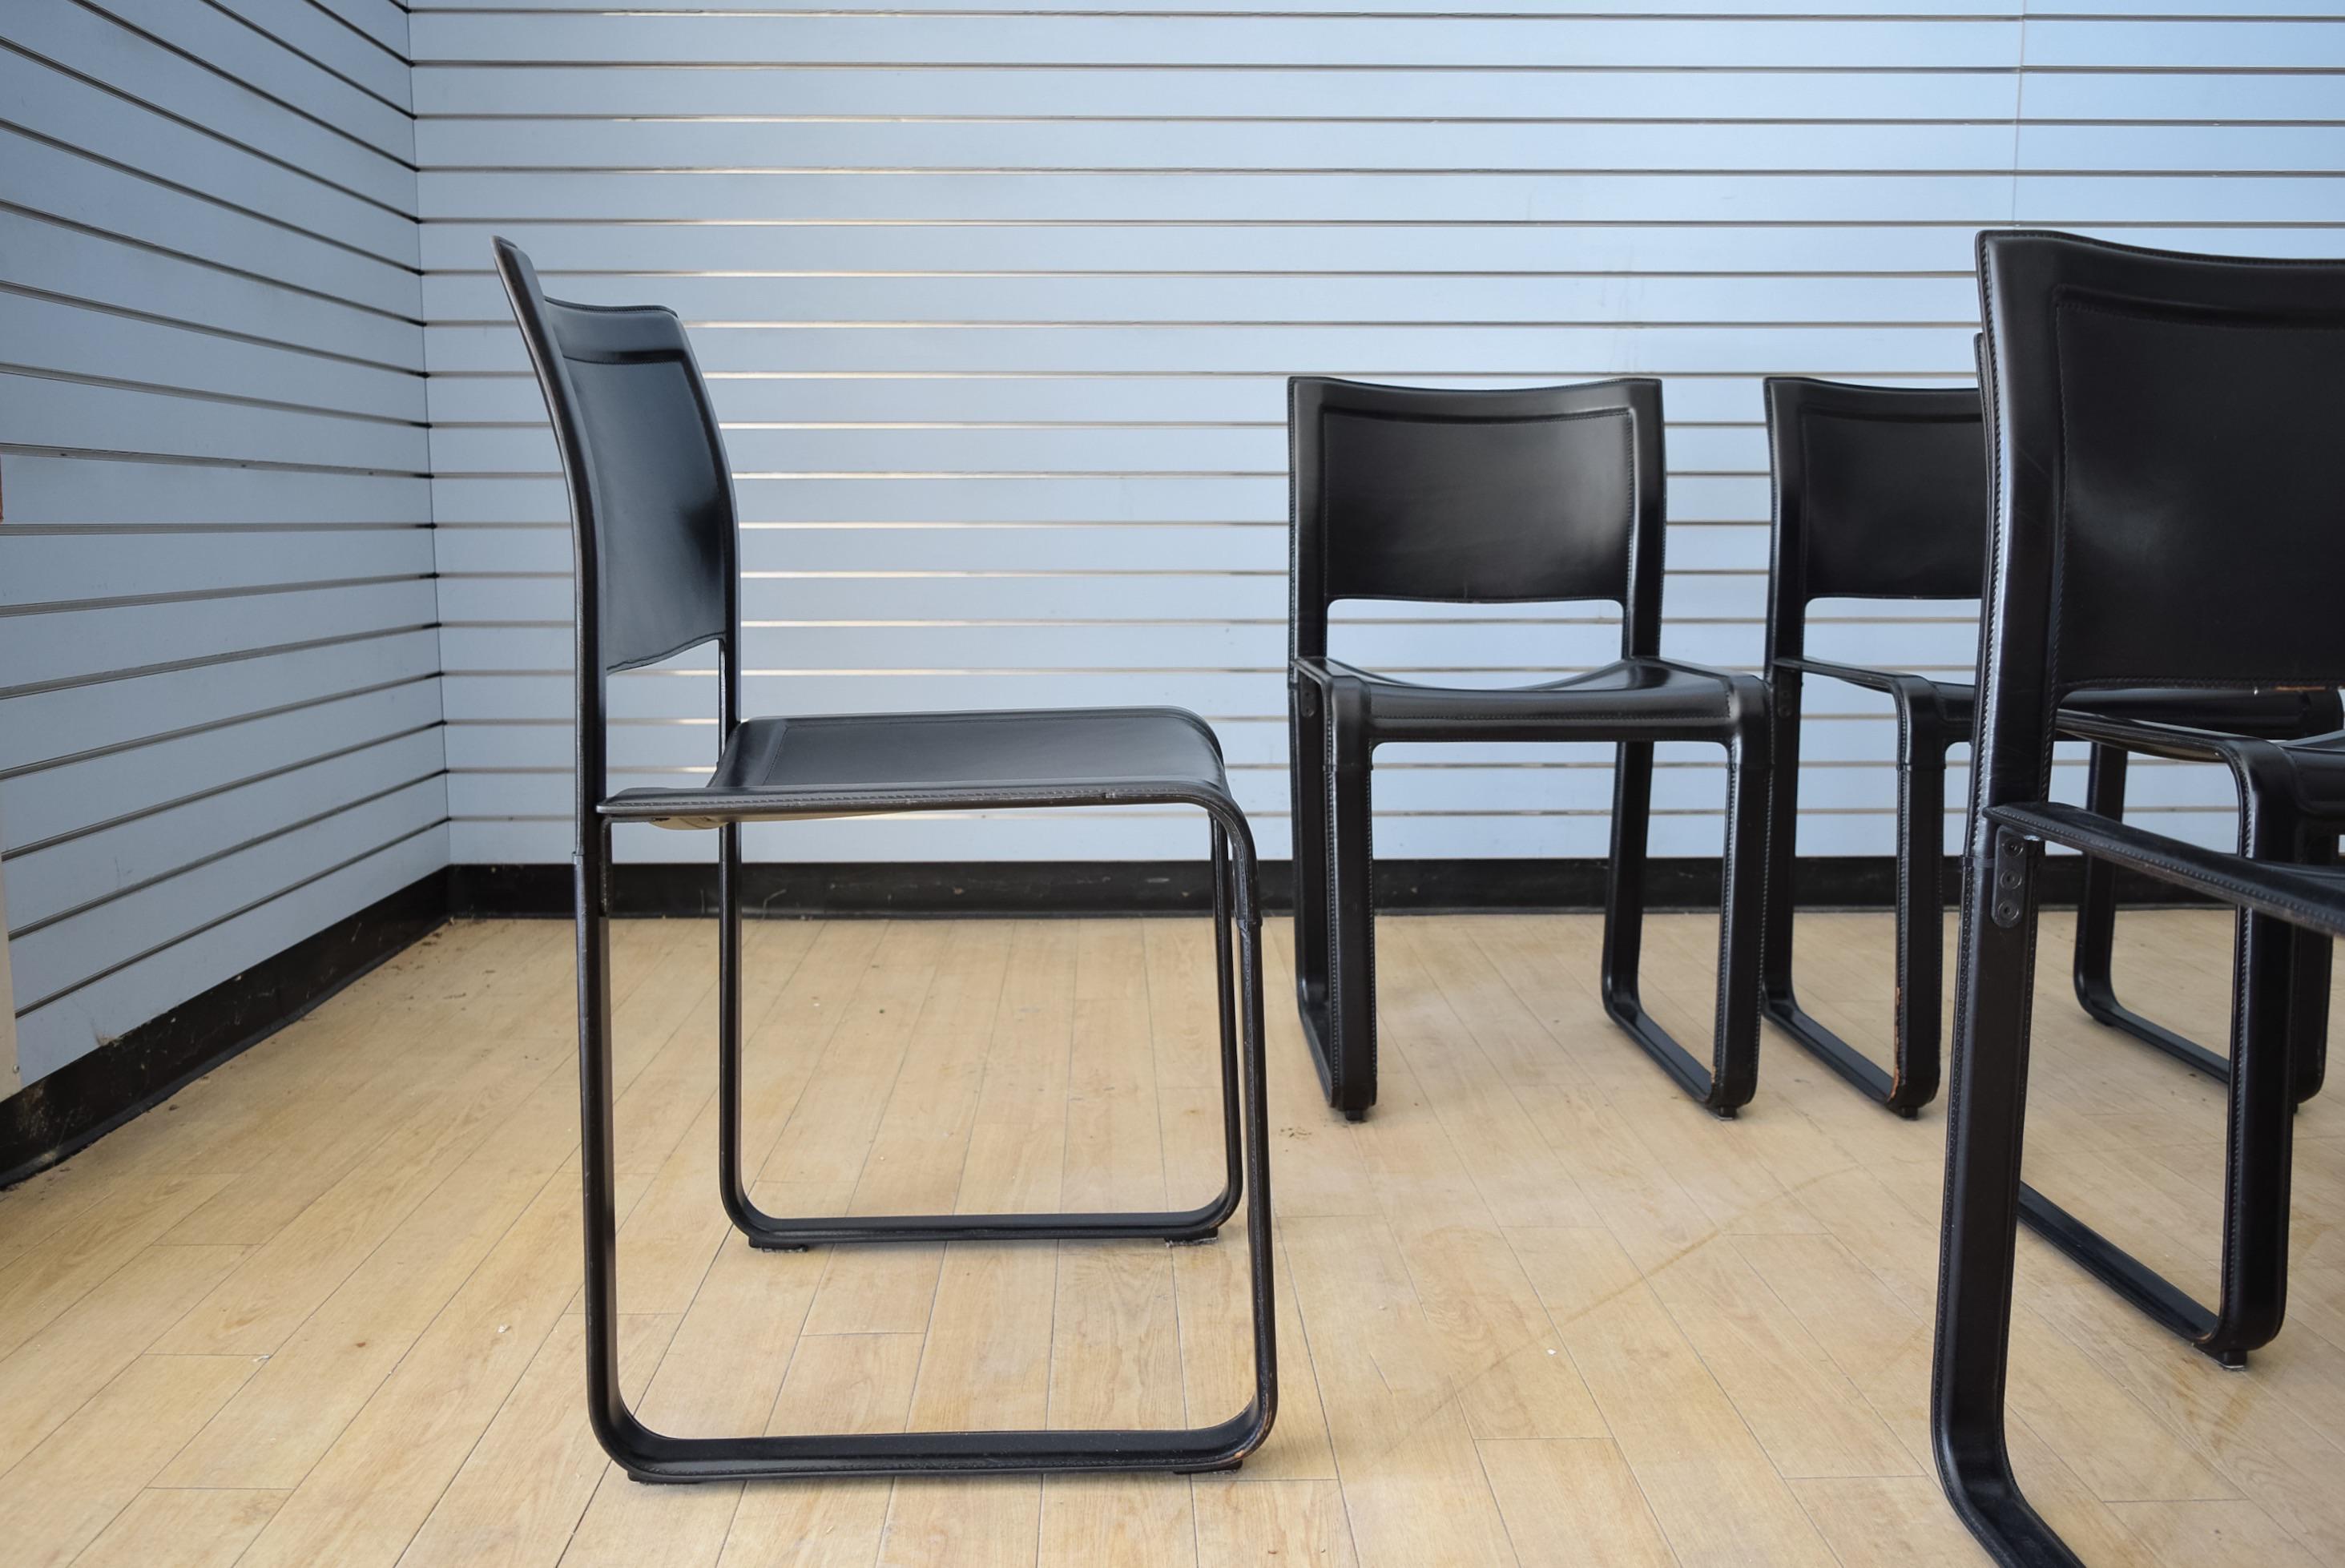 Note: Listing is for one chair. Three matching chairs available. Two chairs have been sold.

Classic Matteo Grassi Sistina black leather dining chairs designed by Tito Agnoli. Finely crafted. Clean Italian design. Rigid metal frames wrapped in